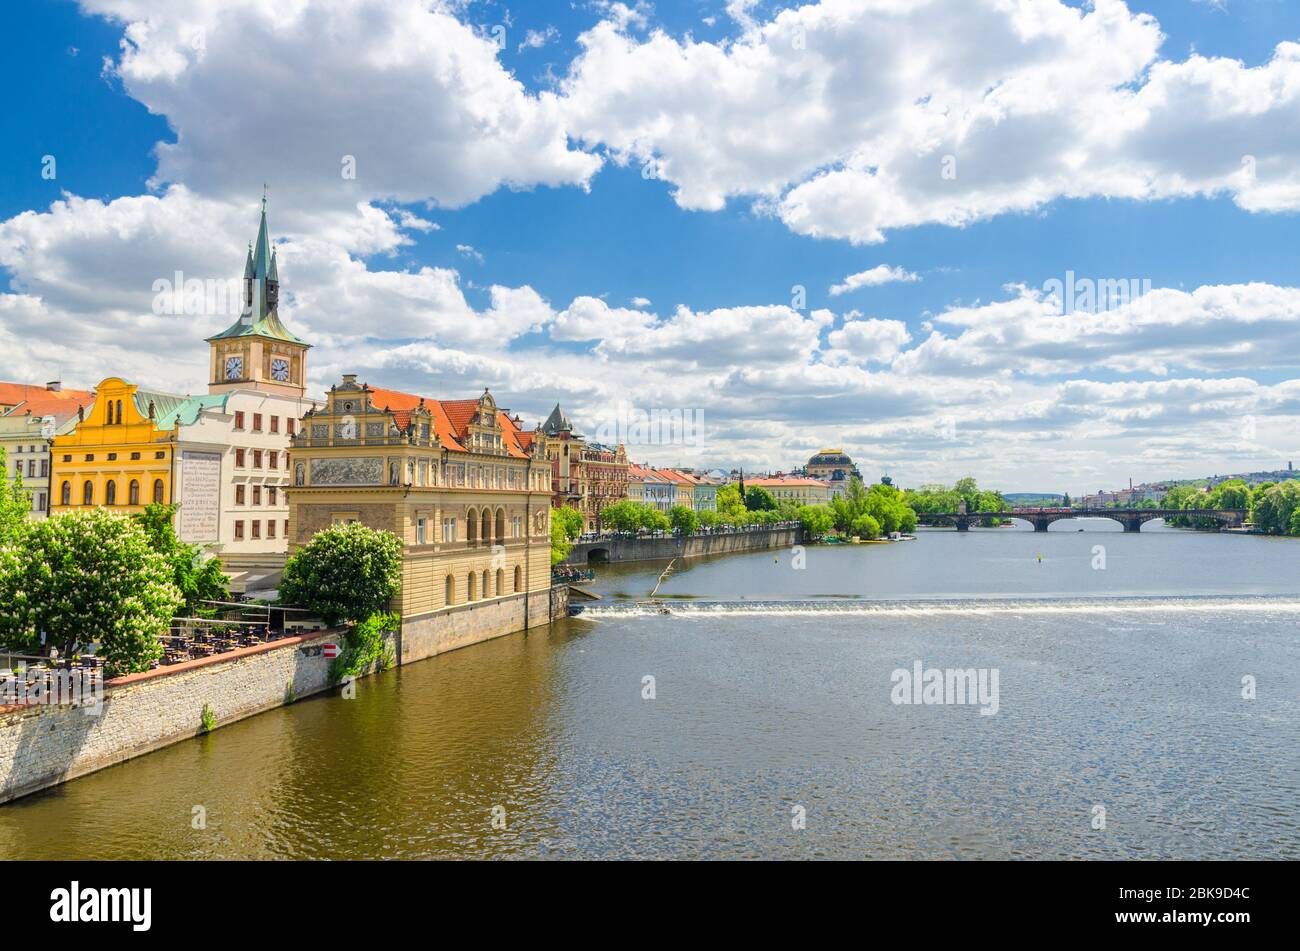 Prague, Czech Republic, May 13, 2019: Bedrich Smetana Museum on the bank of Vltava river in old town historical city center, view from Charles Bridge Karluv Most, blue sky white clouds, Bohemia Stock Photo